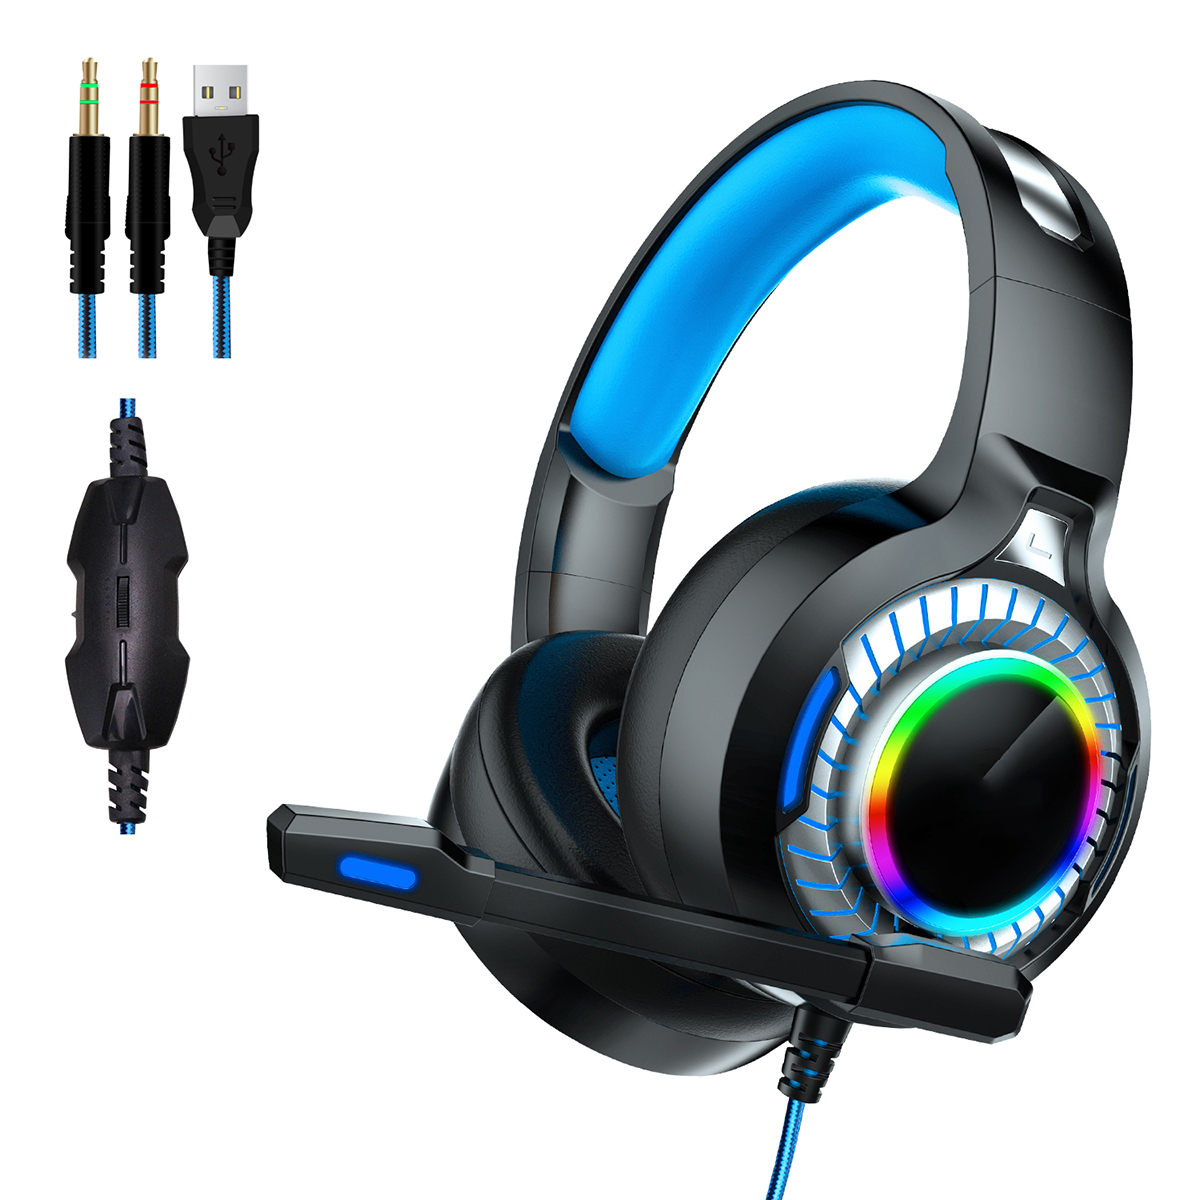 

Gaming Headphone LED Light 7.1 USB Headset With Noise Isolation Mic for PS4 XBOX Laptop